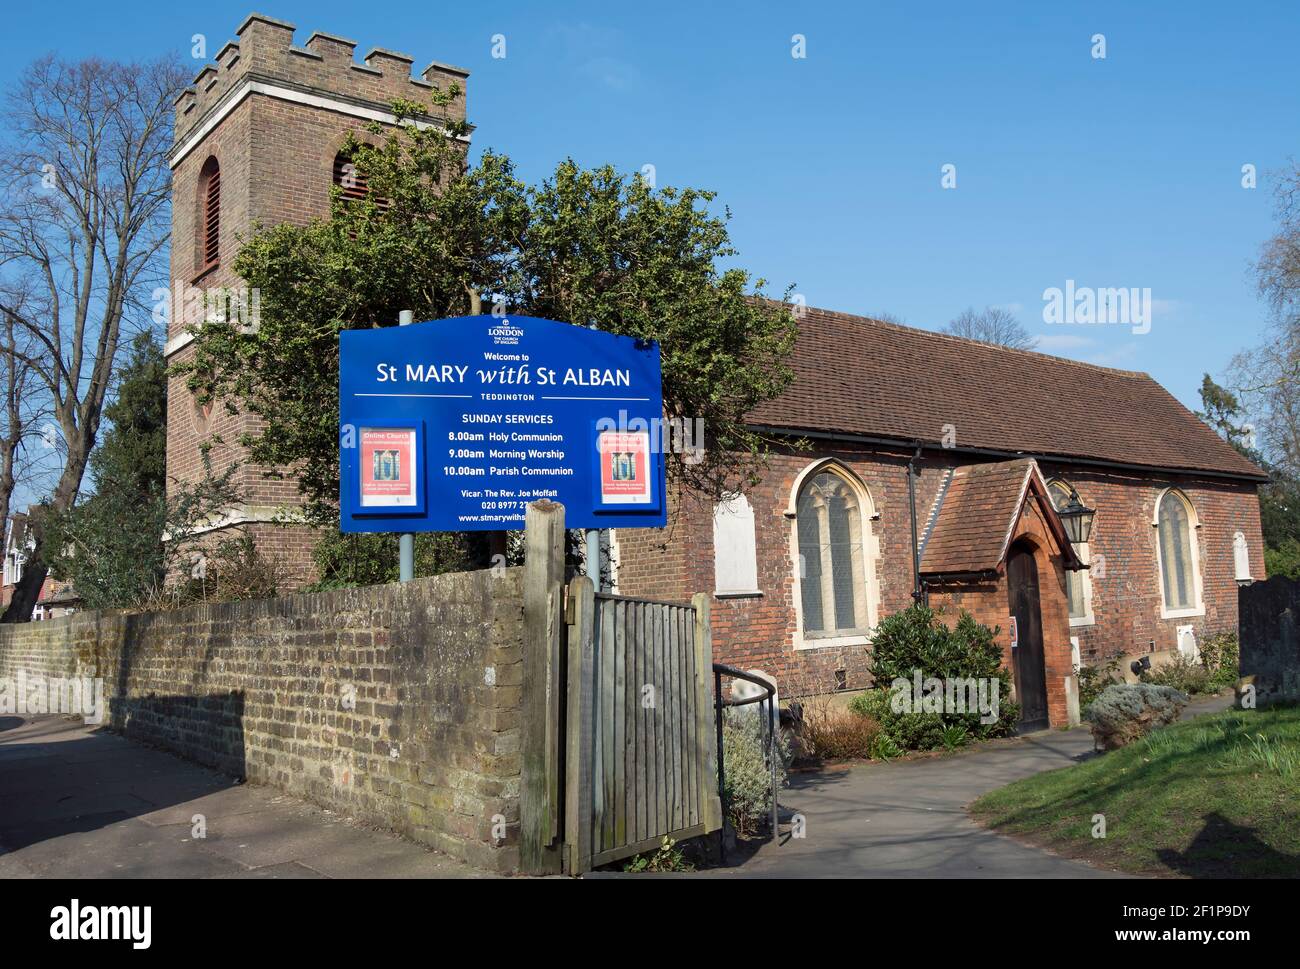 exterior of the partly 17th century church of saint mary with saint alban, teddington, middlesex, england, with welcome sign and sunday service times Stock Photo